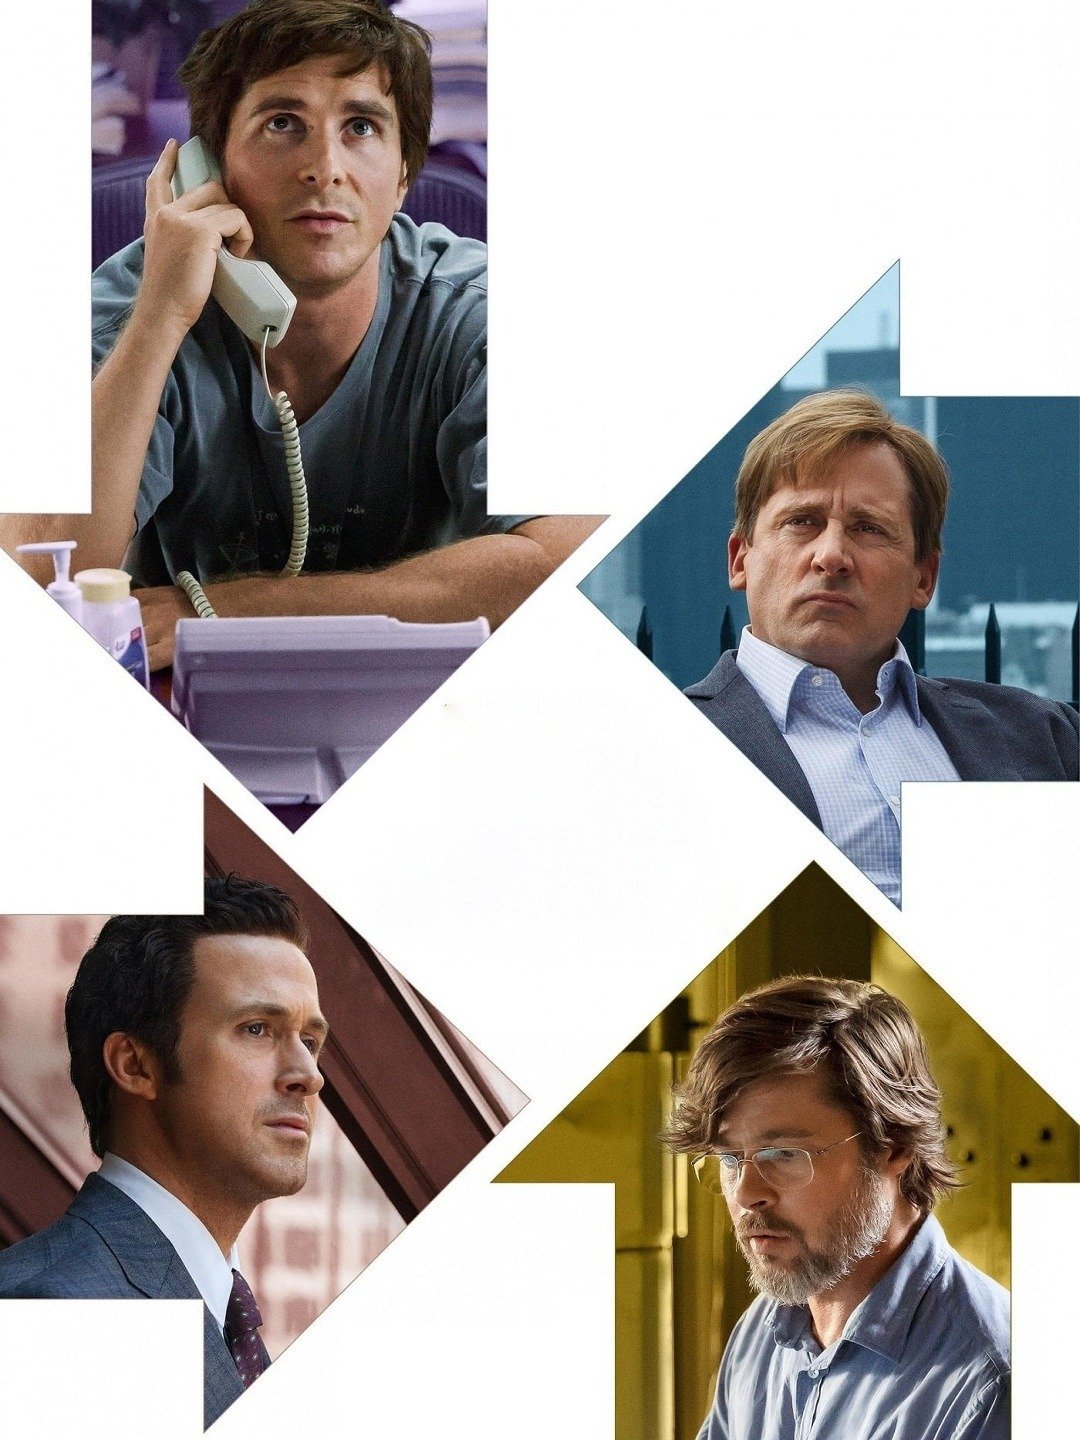 The Big Short: Official Clip - I Want My Money Back - Trailers & Videos -  Rotten Tomatoes